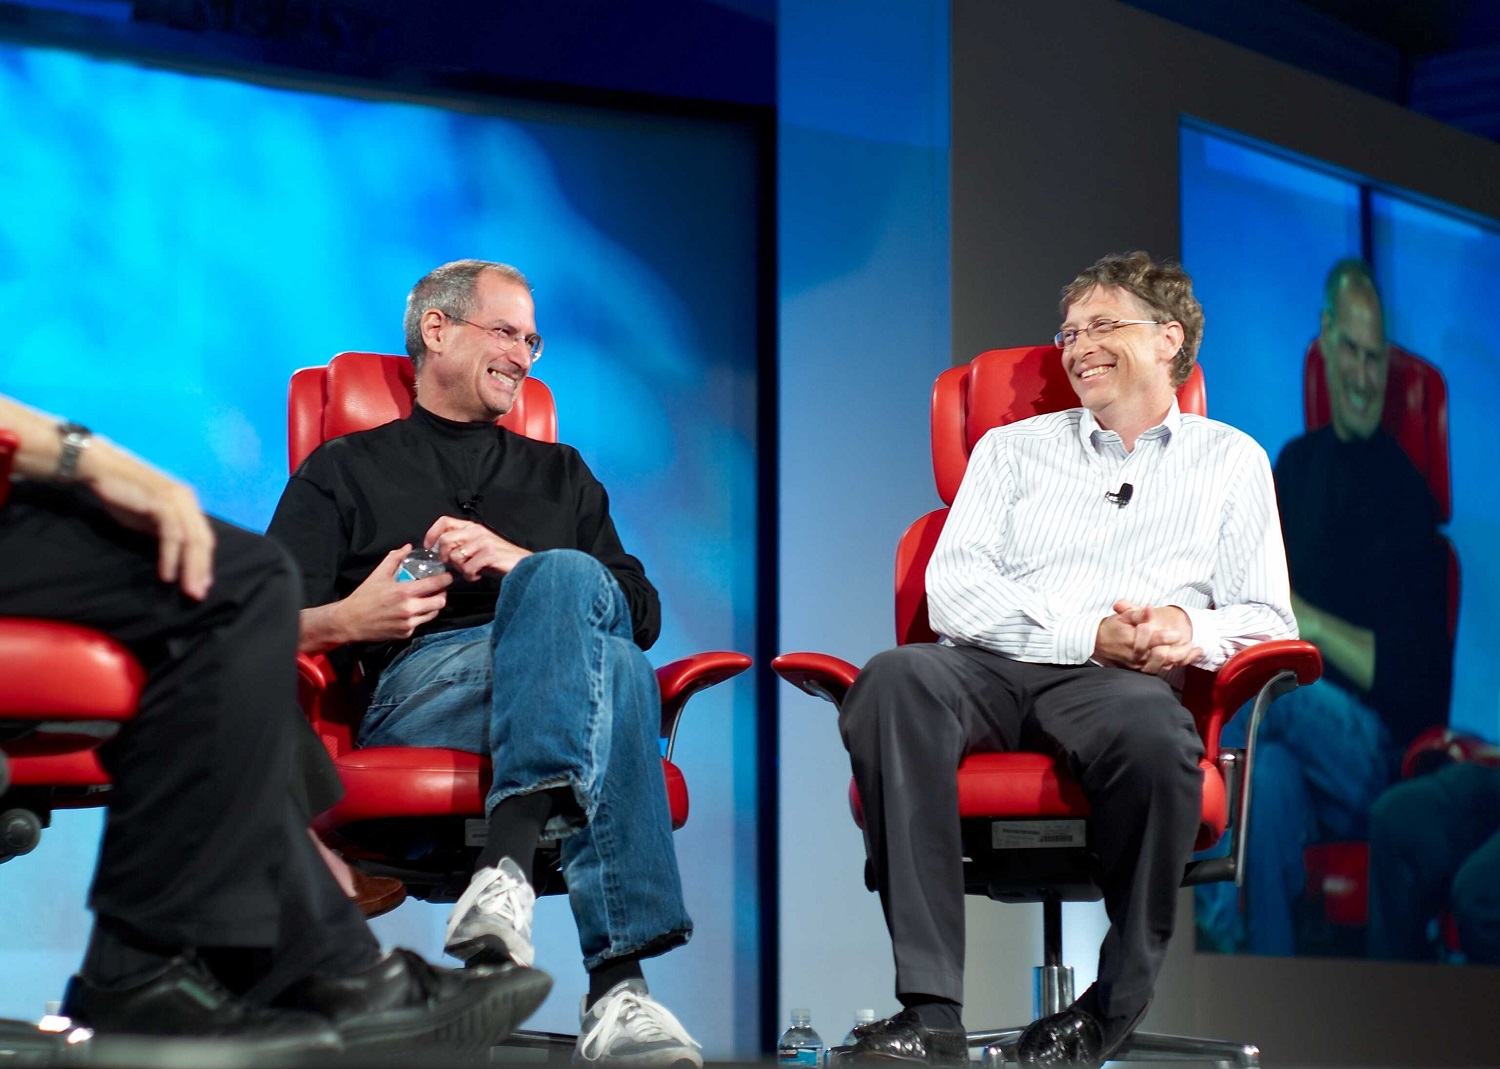 Steve Jobs and Bill Gates in an interview